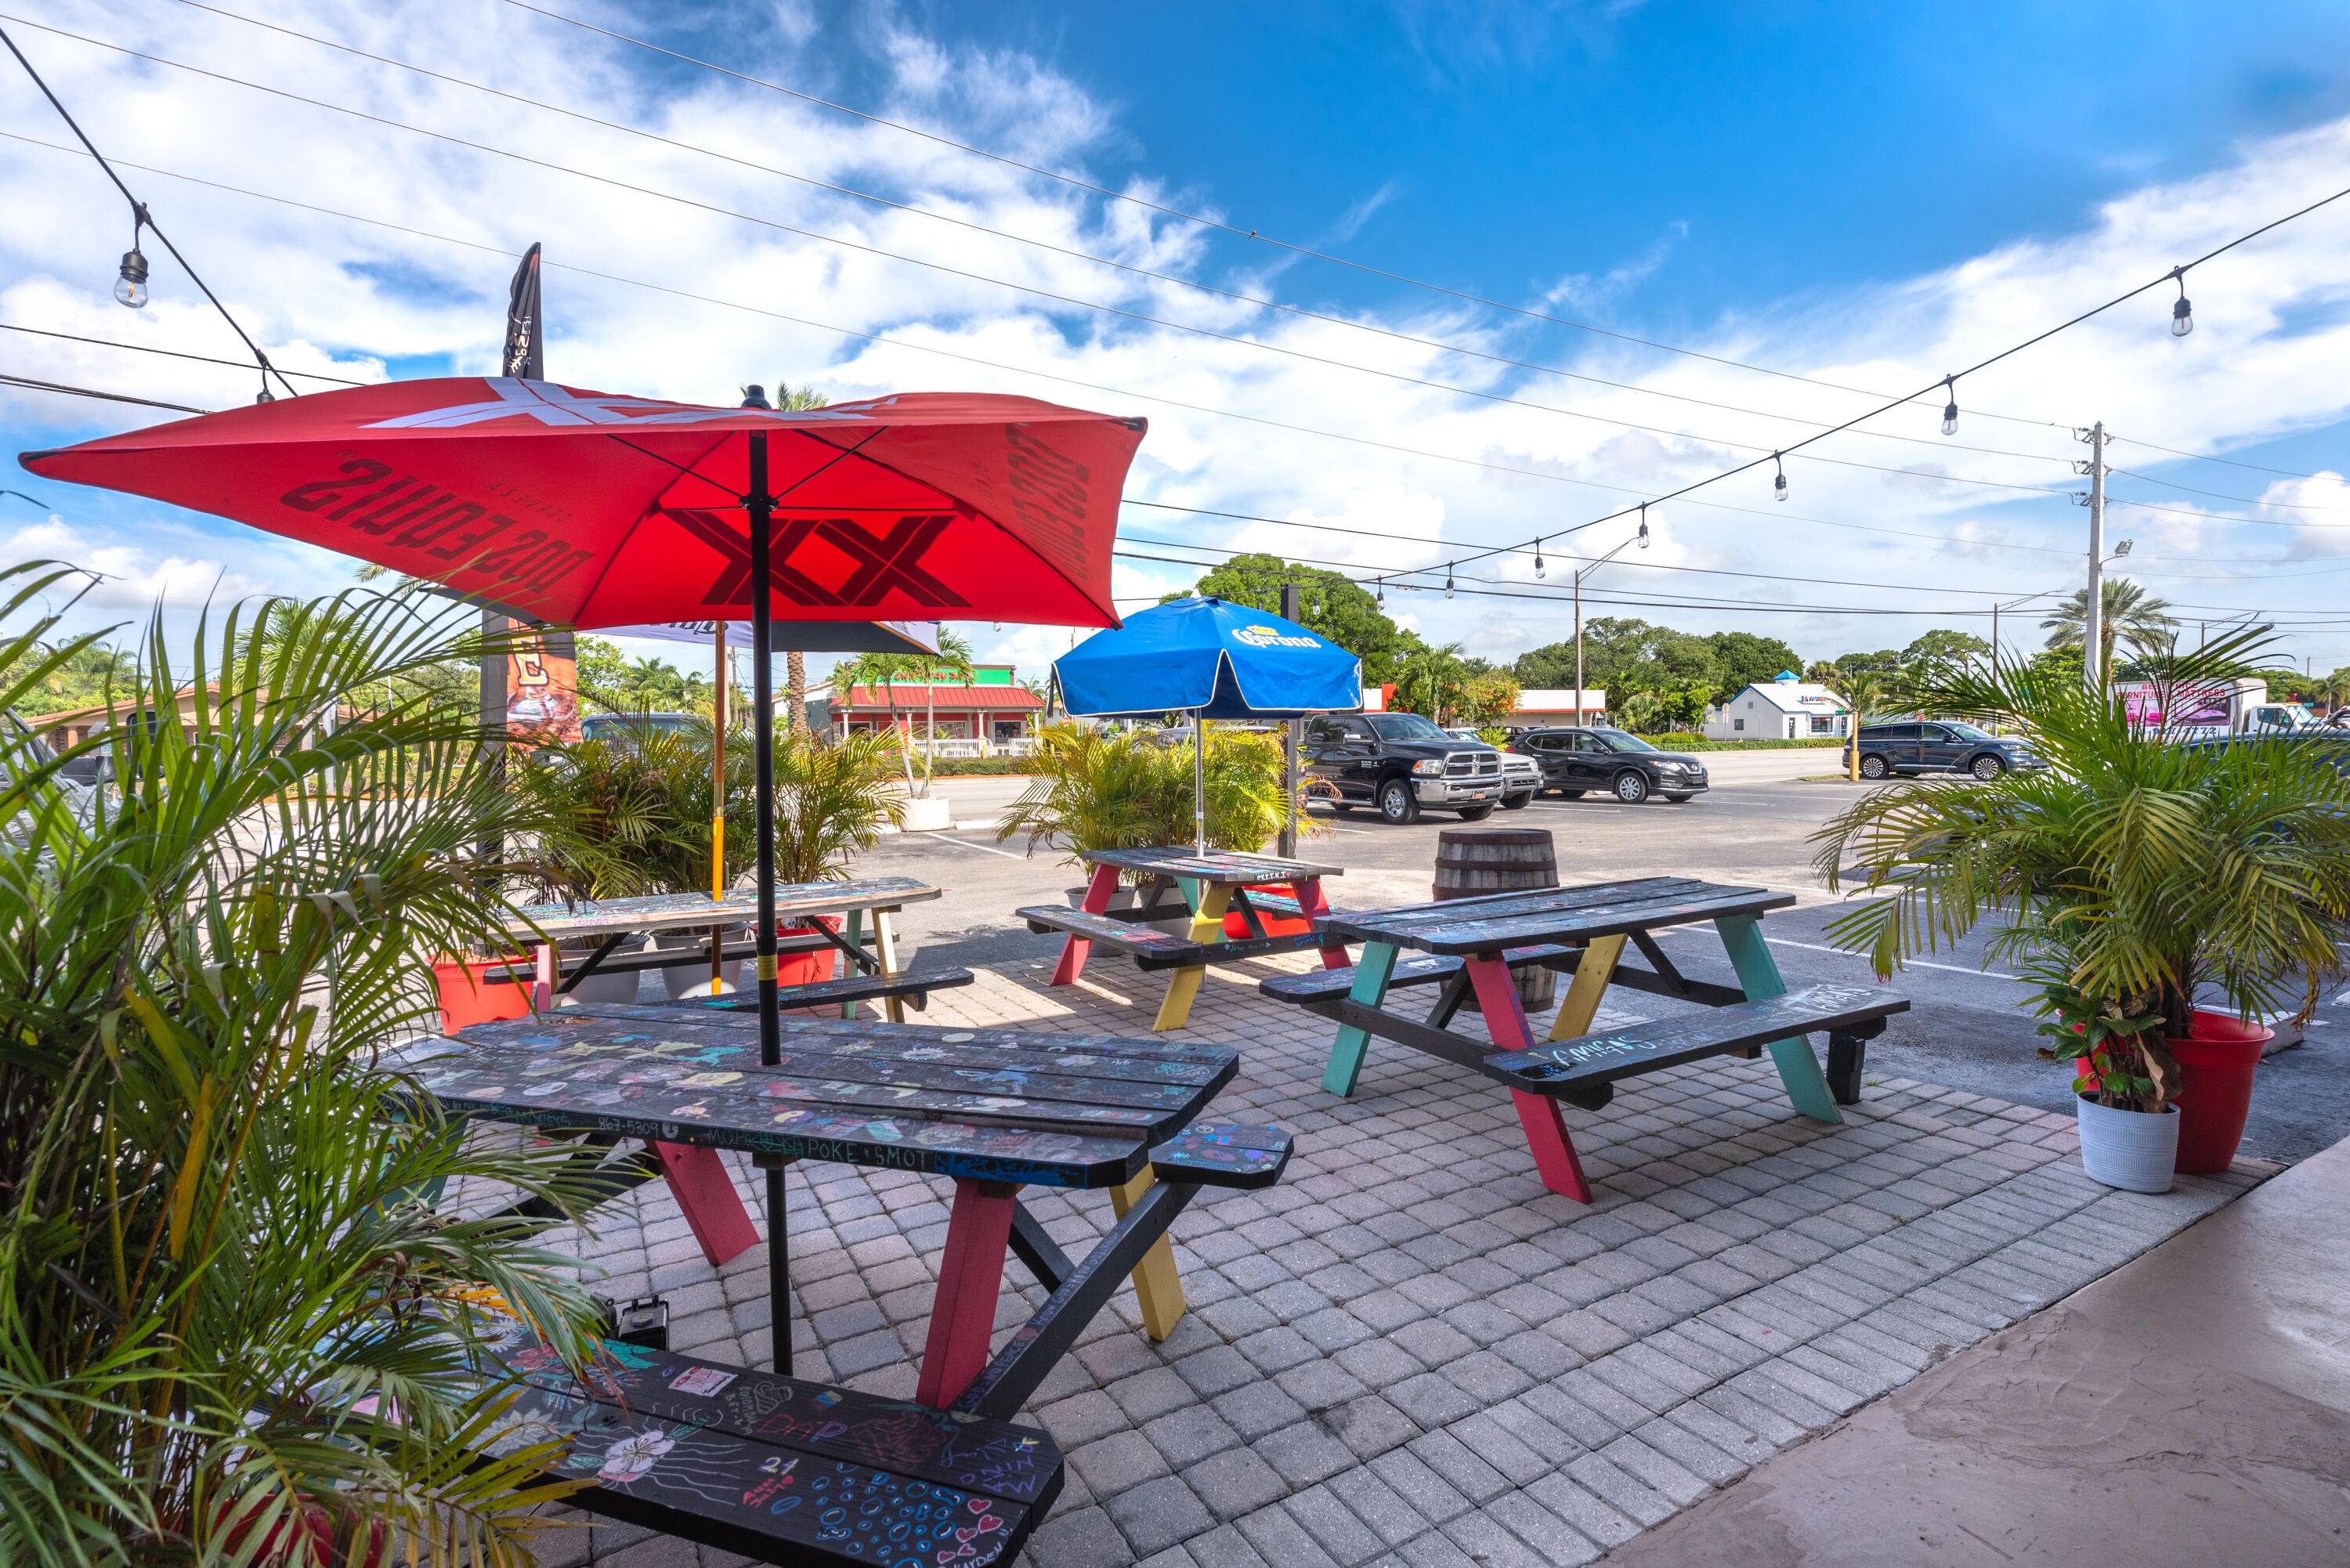 Tavern Pub Turnkey, 8 taps, Stand up freezer, Small Freezer, Ice machine, Outside furniture, and much more, inventory of asset sale available upon request, Small kitchen an outdoor patio Interior ...